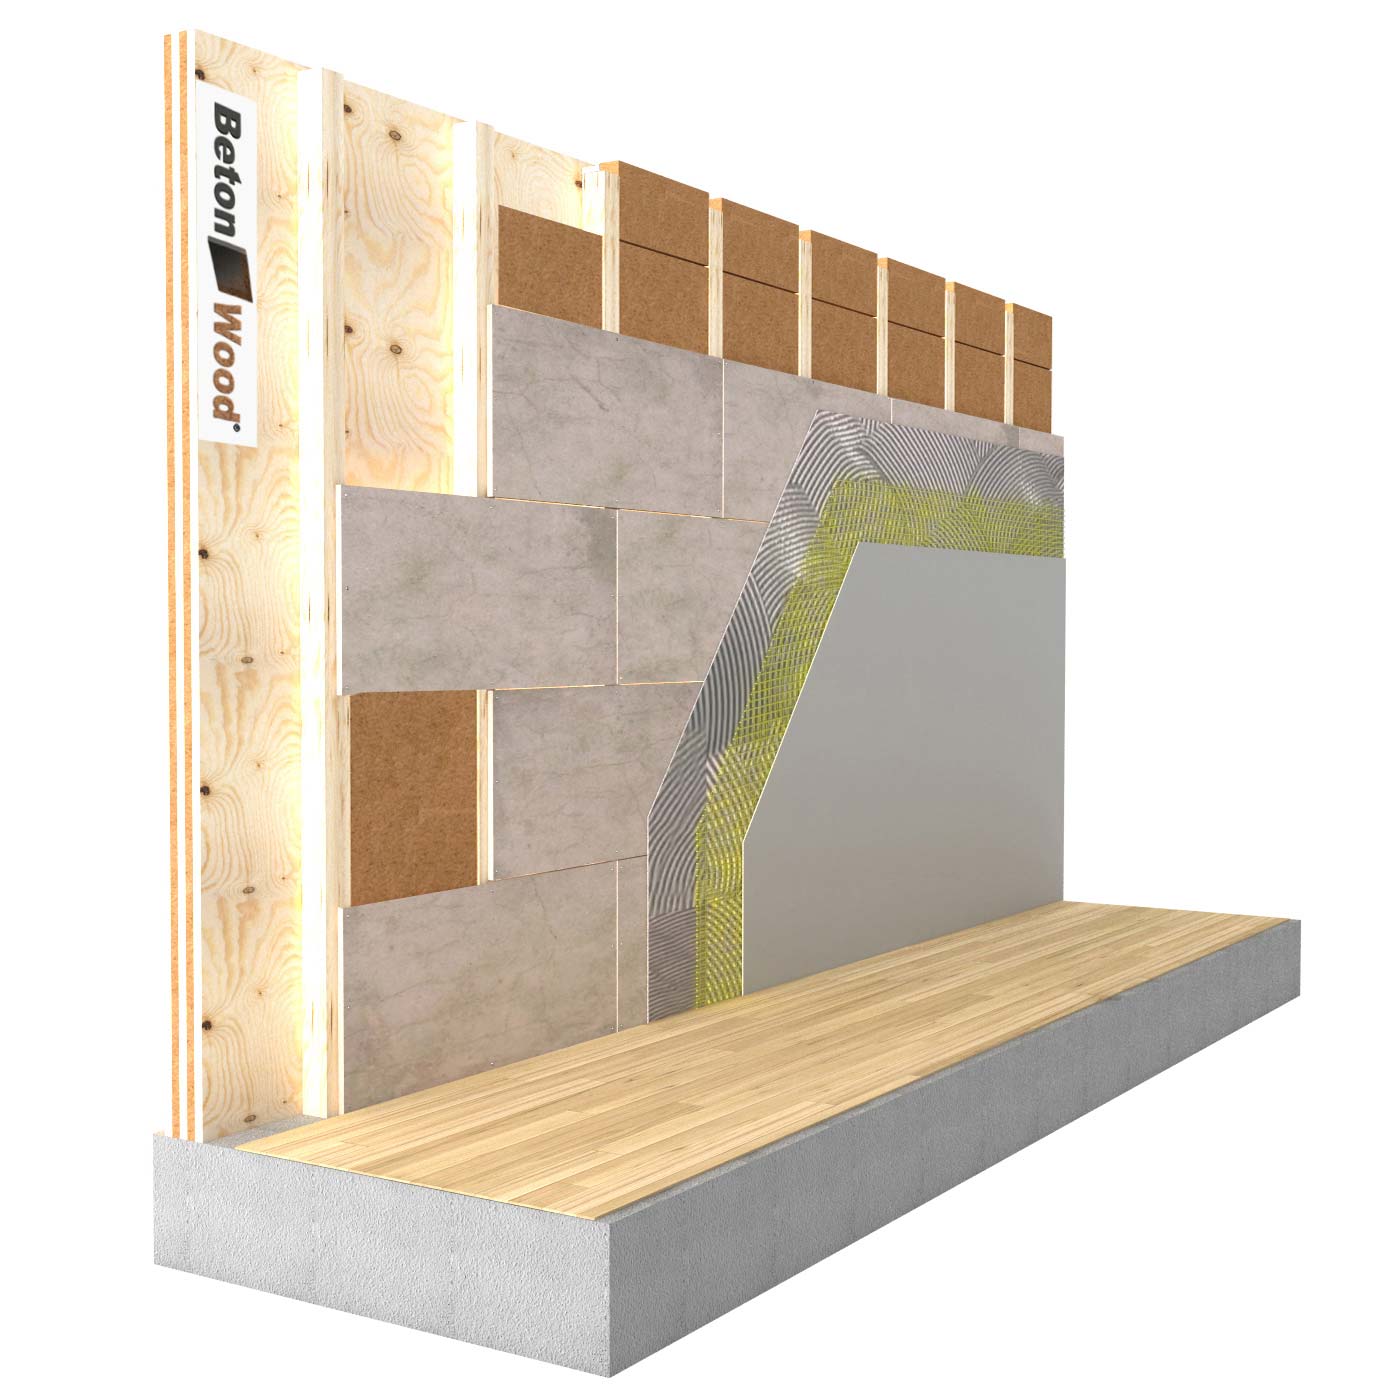 Internal insulation system with fiber wood FiberTherm and cement bonded particle board on X-Lam